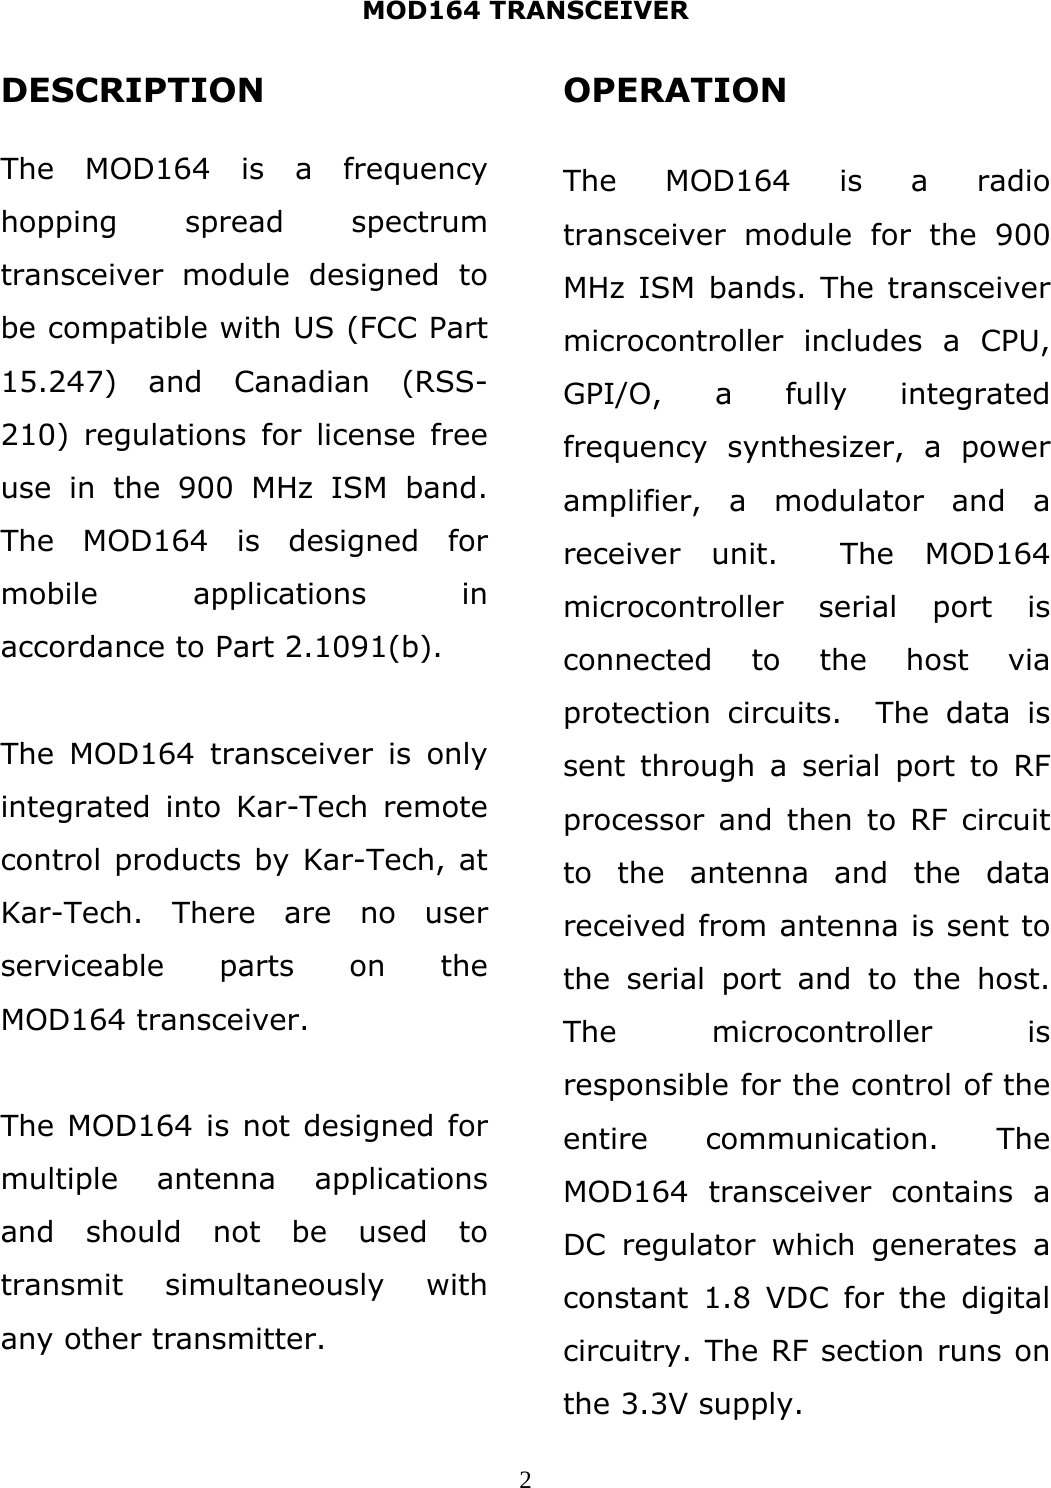 MOD164 TRANSCEIVER  2DESCRIPTION  The MOD164 is a frequency hopping spread spectrum transceiver module designed to be compatible with US (FCC Part 15.247) and Canadian (RSS-210) regulations for license free use in the 900 MHz ISM band. The MOD164 is designed for mobile applications in accordance to Part 2.1091(b).  The MOD164 transceiver is only integrated into Kar-Tech remote control products by Kar-Tech, at Kar-Tech. There are no user serviceable parts on the MOD164 transceiver.  The MOD164 is not designed for multiple antenna applications and should not be used to transmit simultaneously with any other transmitter.  OPERATION  The MOD164 is a radio transceiver module for the 900 MHz ISM bands. The transceiver microcontroller includes a CPU, GPI/O, a fully integrated frequency synthesizer, a power amplifier, a modulator and a receiver unit.  The MOD164 microcontroller serial port is connected to the host via protection circuits.  The data is sent through a serial port to RF processor and then to RF circuit to the antenna and the data received from antenna is sent to the serial port and to the host. The microcontroller is responsible for the control of the entire communication. The MOD164 transceiver contains a DC regulator which generates a constant 1.8 VDC for the digital circuitry. The RF section runs on the 3.3V supply. 